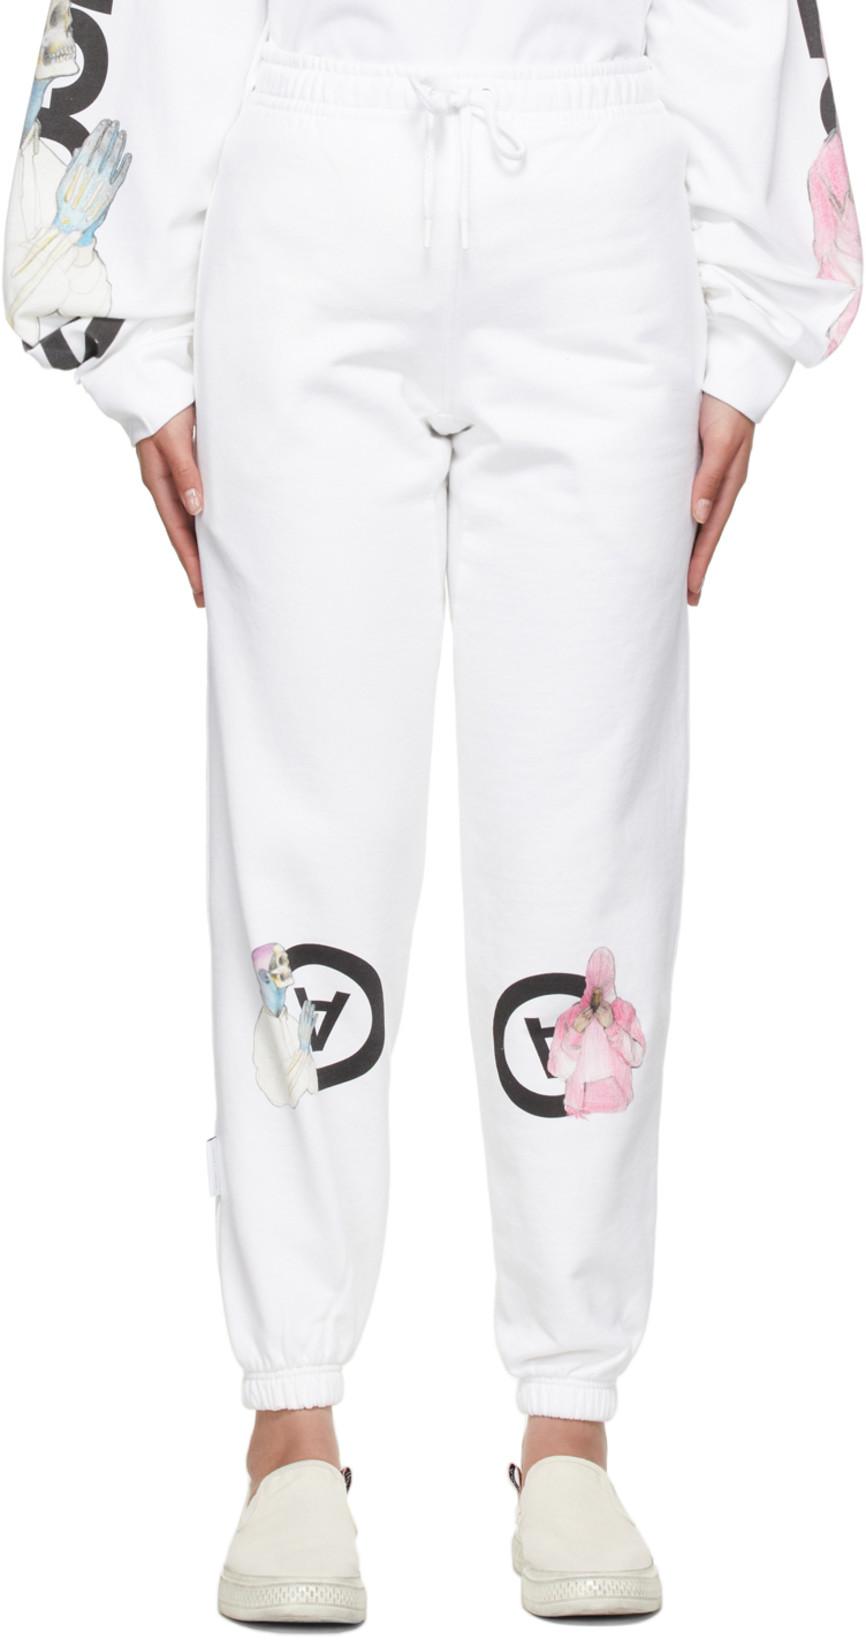 White 'No2705' & 'No3037' Lounge Pants by AITOR THROUP'S THEDSA